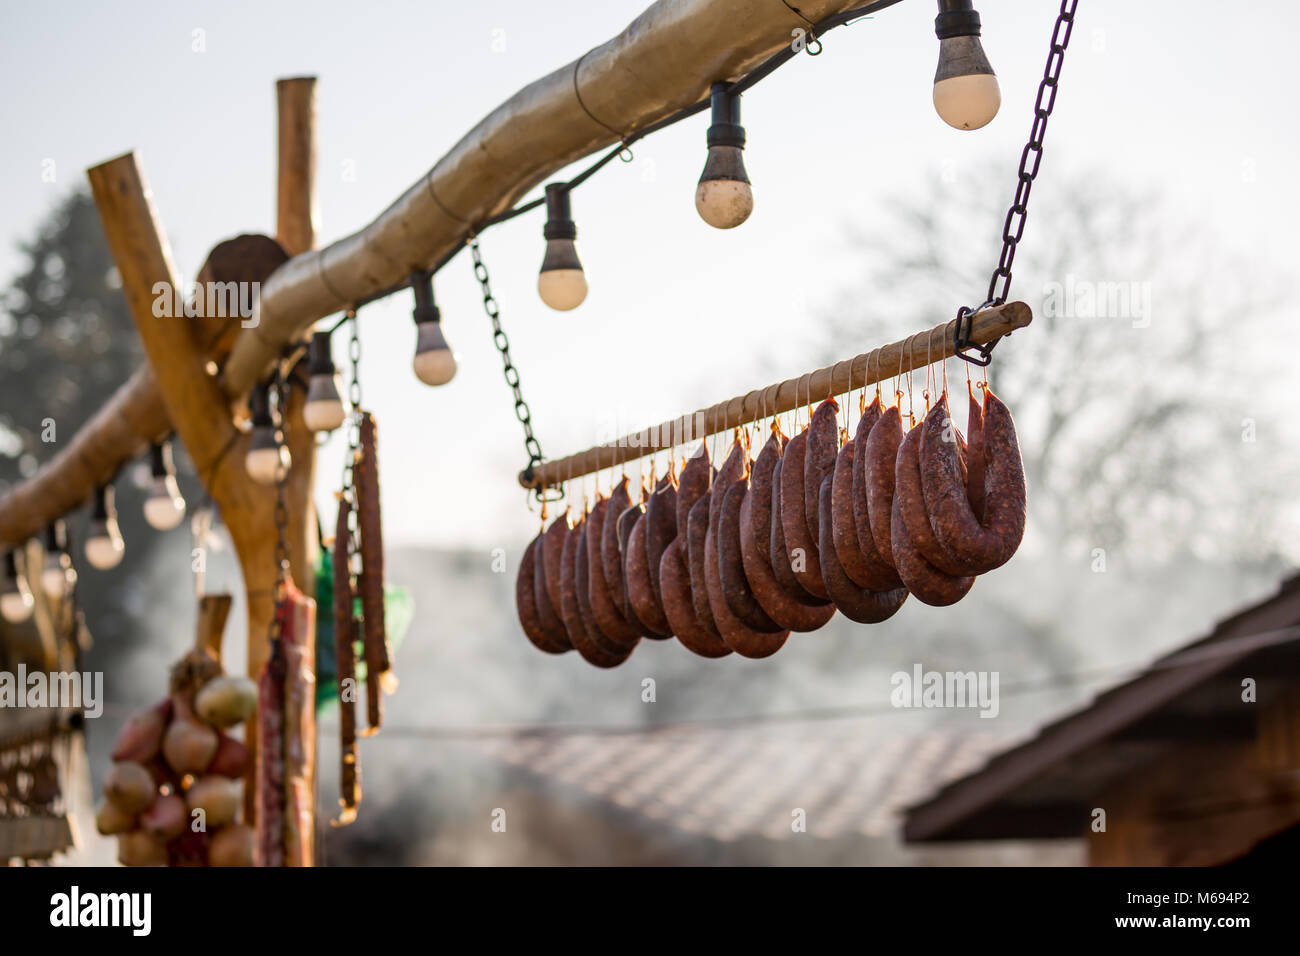 Hanging home made pork sausages outside Stock Photo